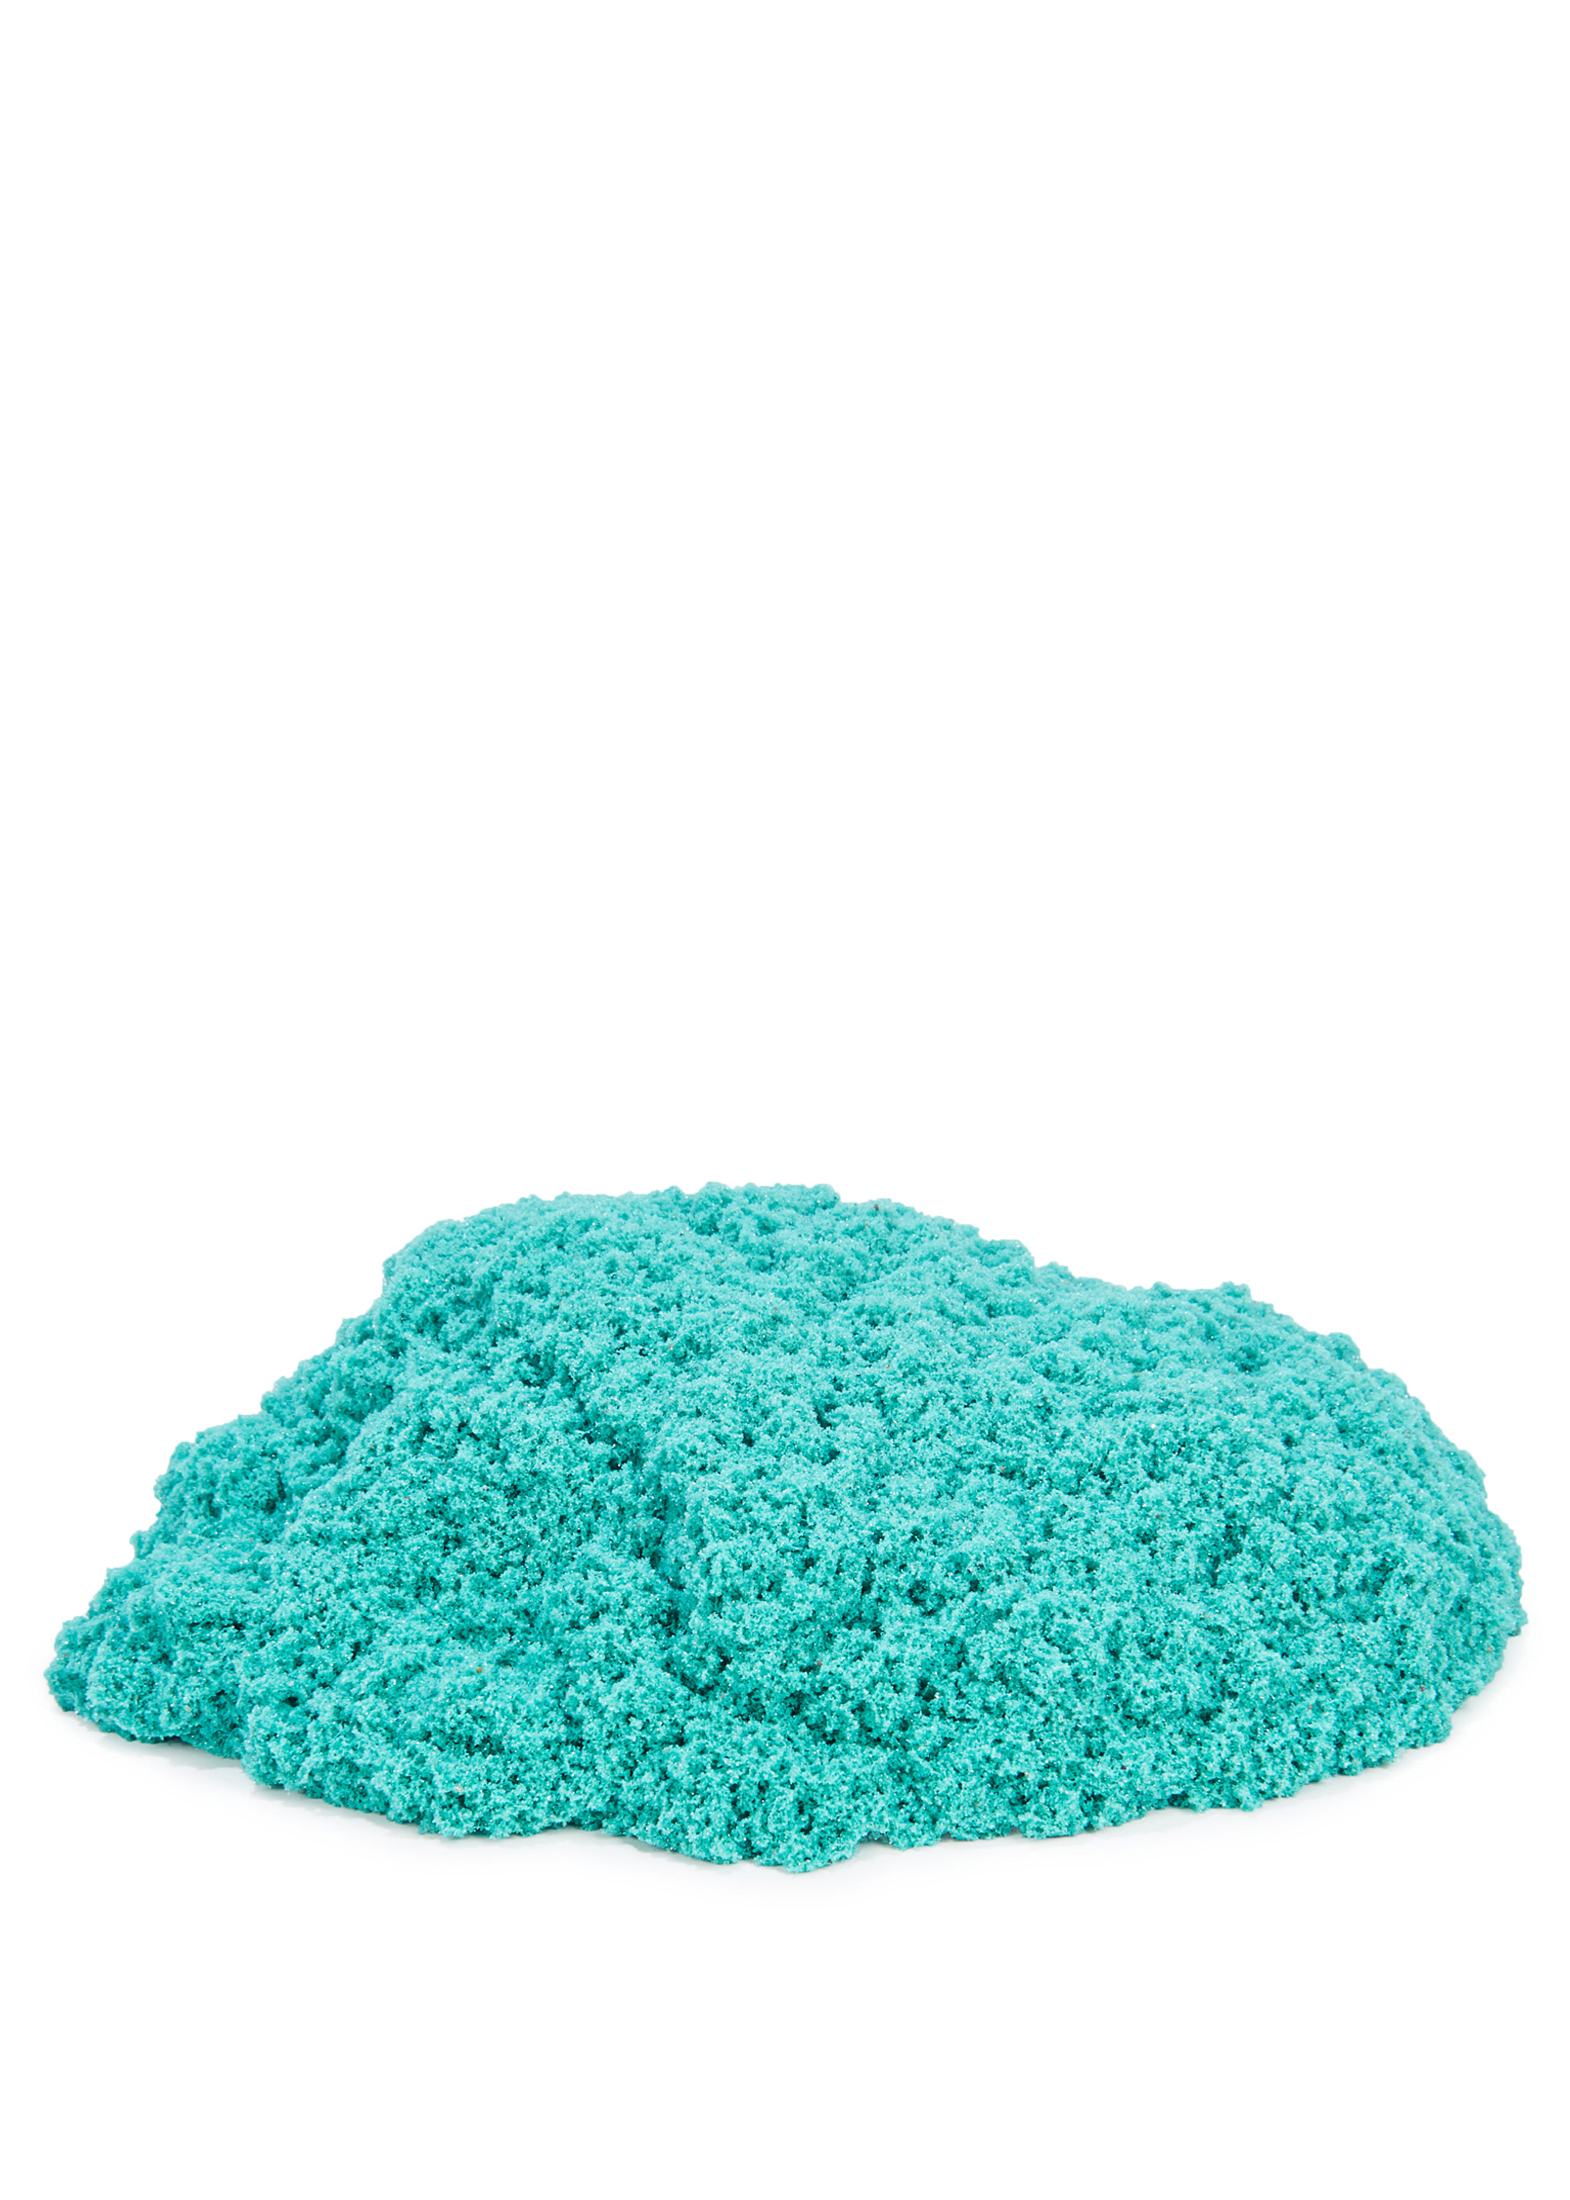 Kinetic Sand - Glitzer Sand Twinkly Teal 907 g image number 1